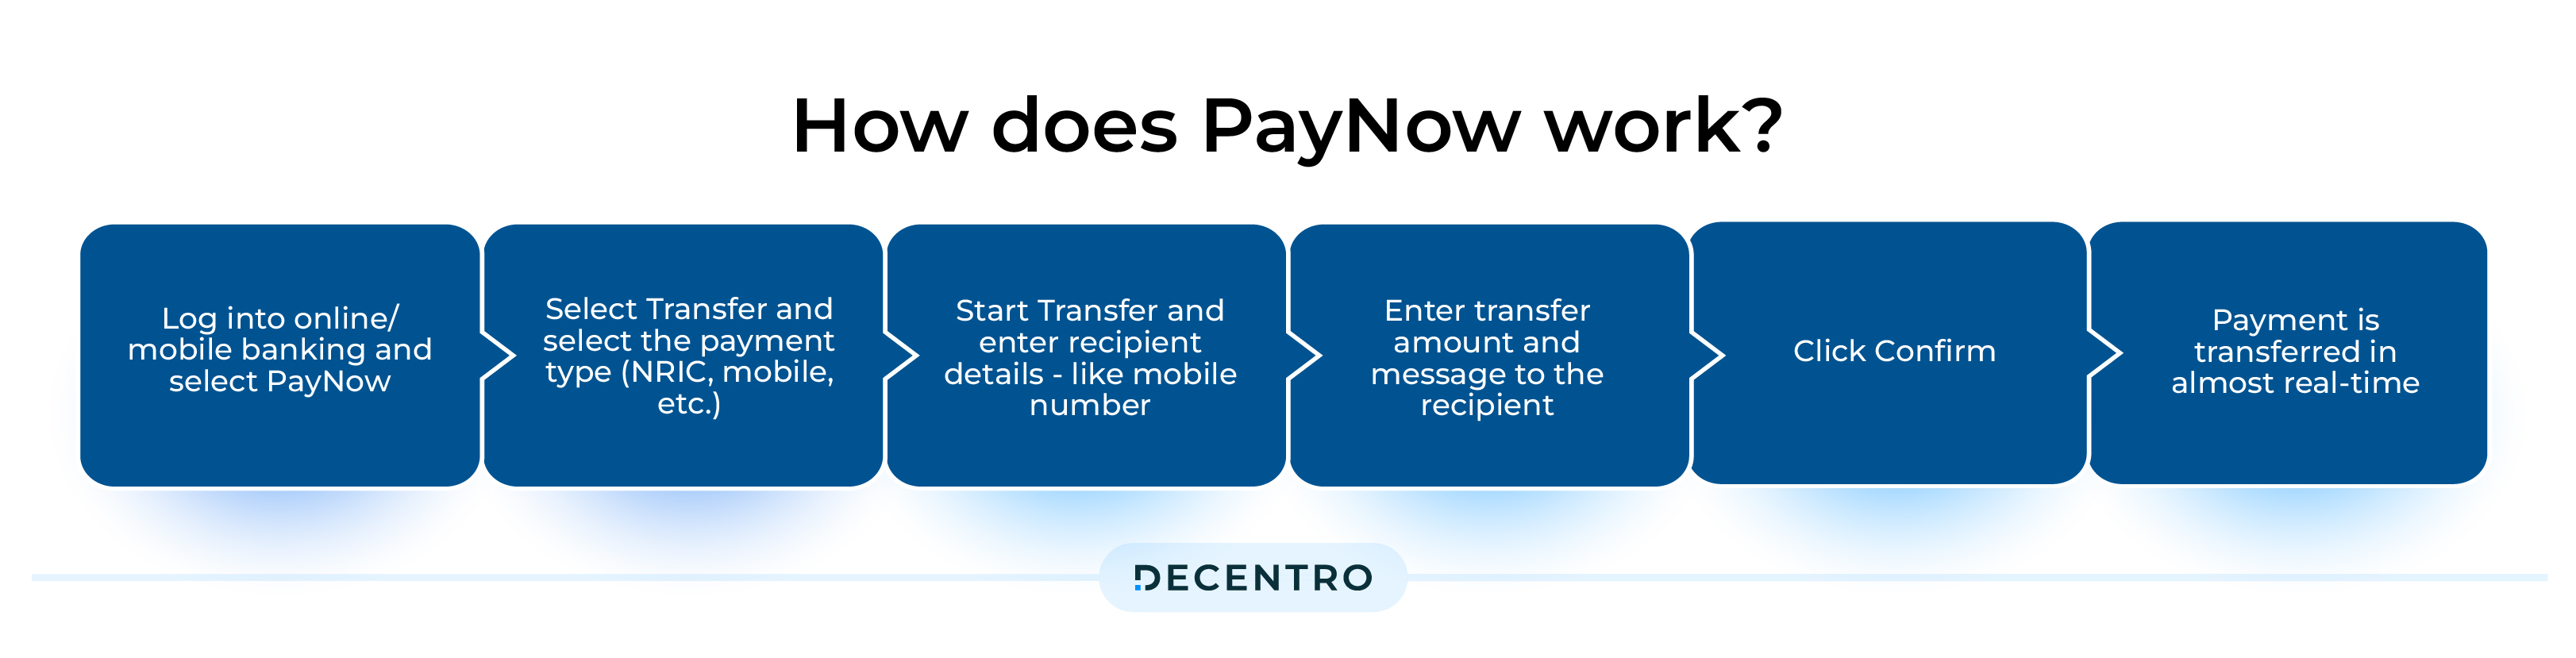 How does PayNow work?